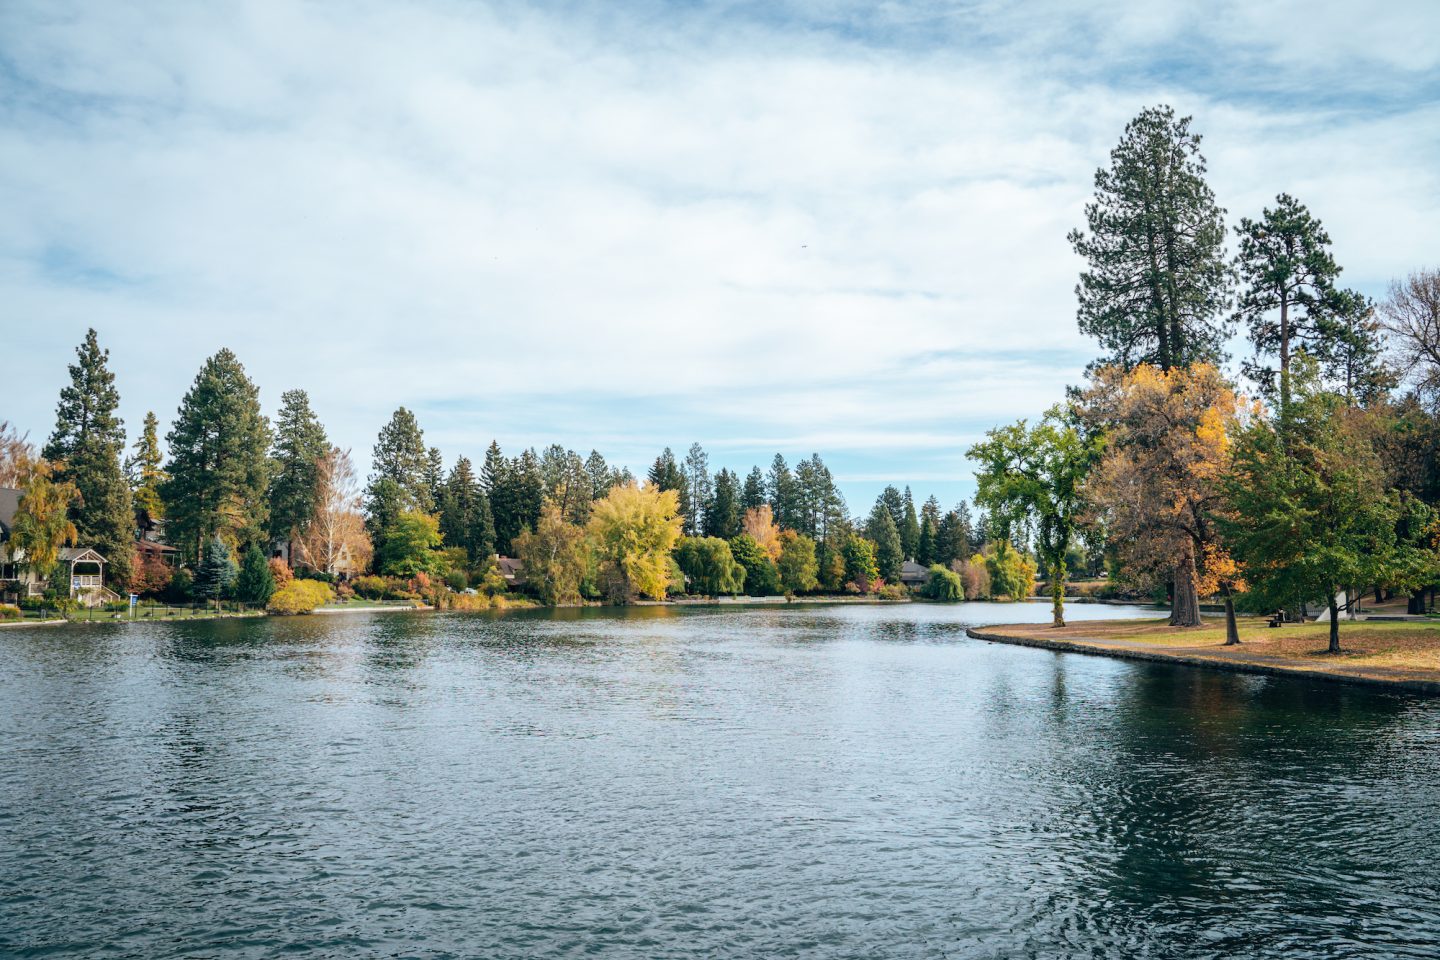 Drake Park & Mirror Pond - Bend Oregon - The perfect Bend Oregon hotel stay for vanlifers